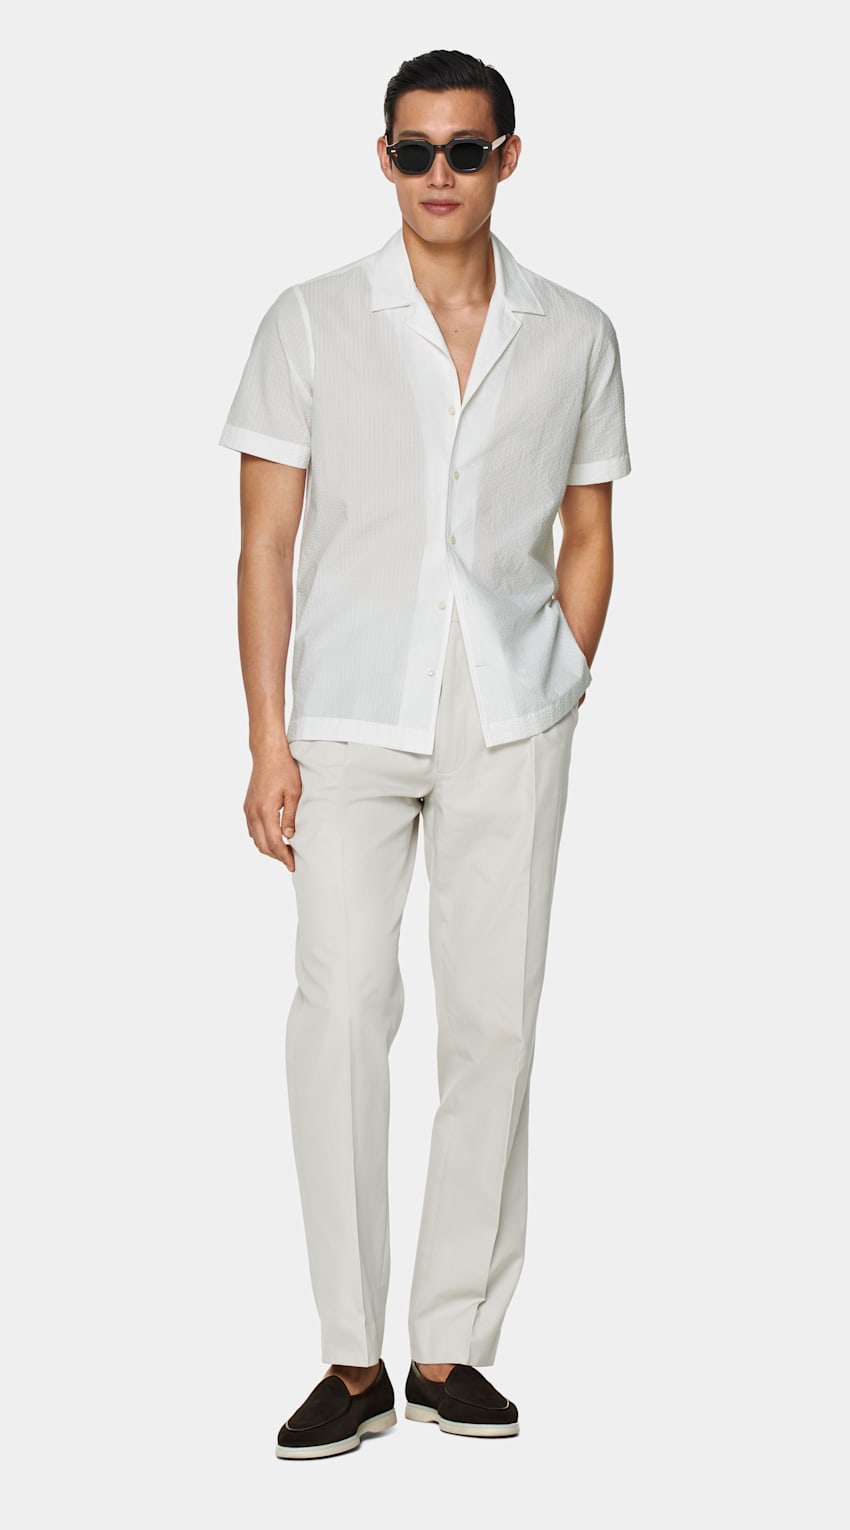 SUITSUPPLY Egyptian Cotton Seersucker by Albini, Italy White Camp Collar Slim Fit Shirt